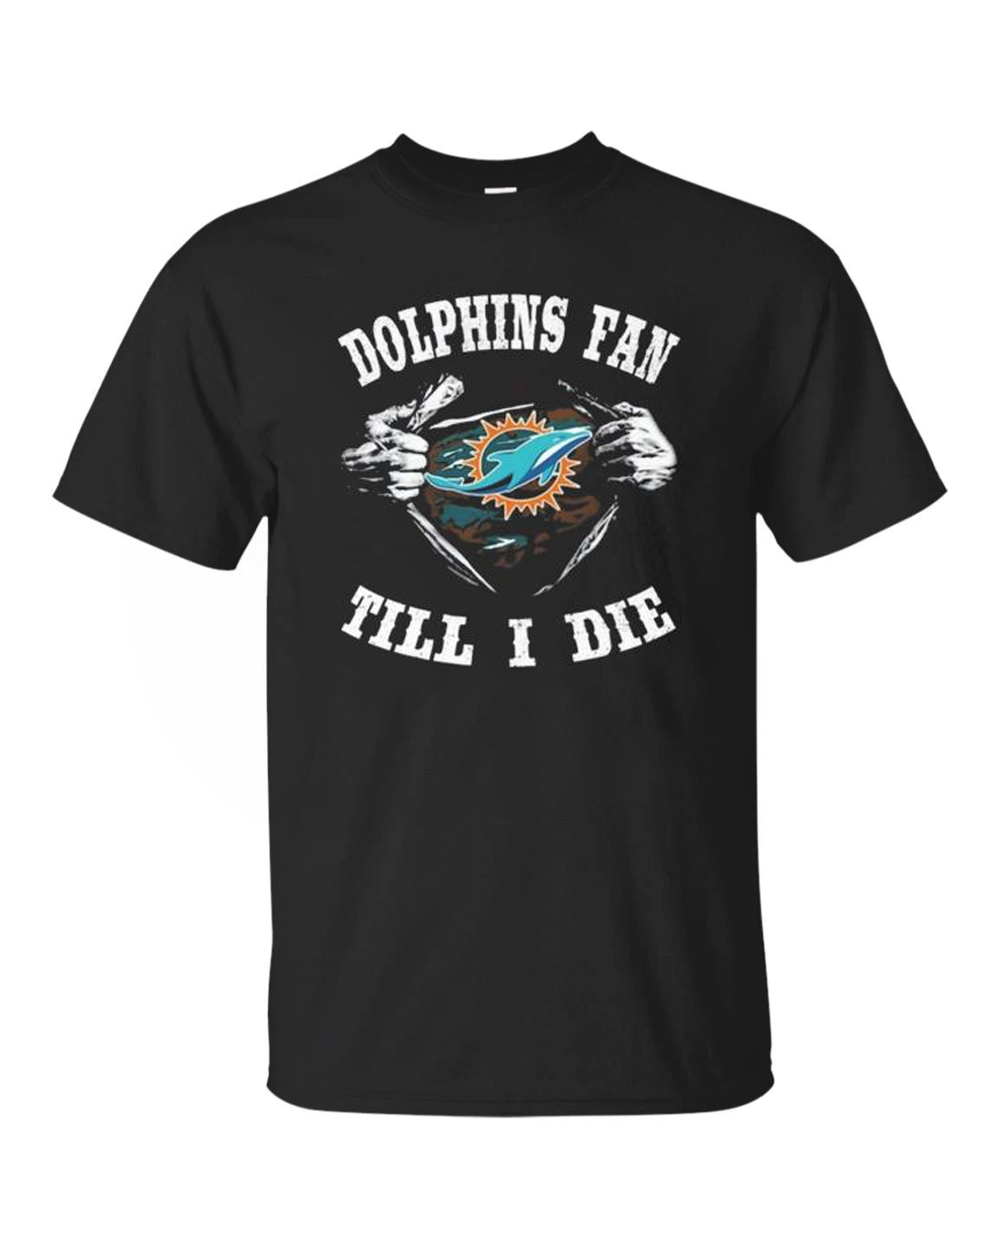 Miami Dolphins Shop - NFL Miami Dolphins Blood Inside Me Dolphins Fan Till I Die T Shirt